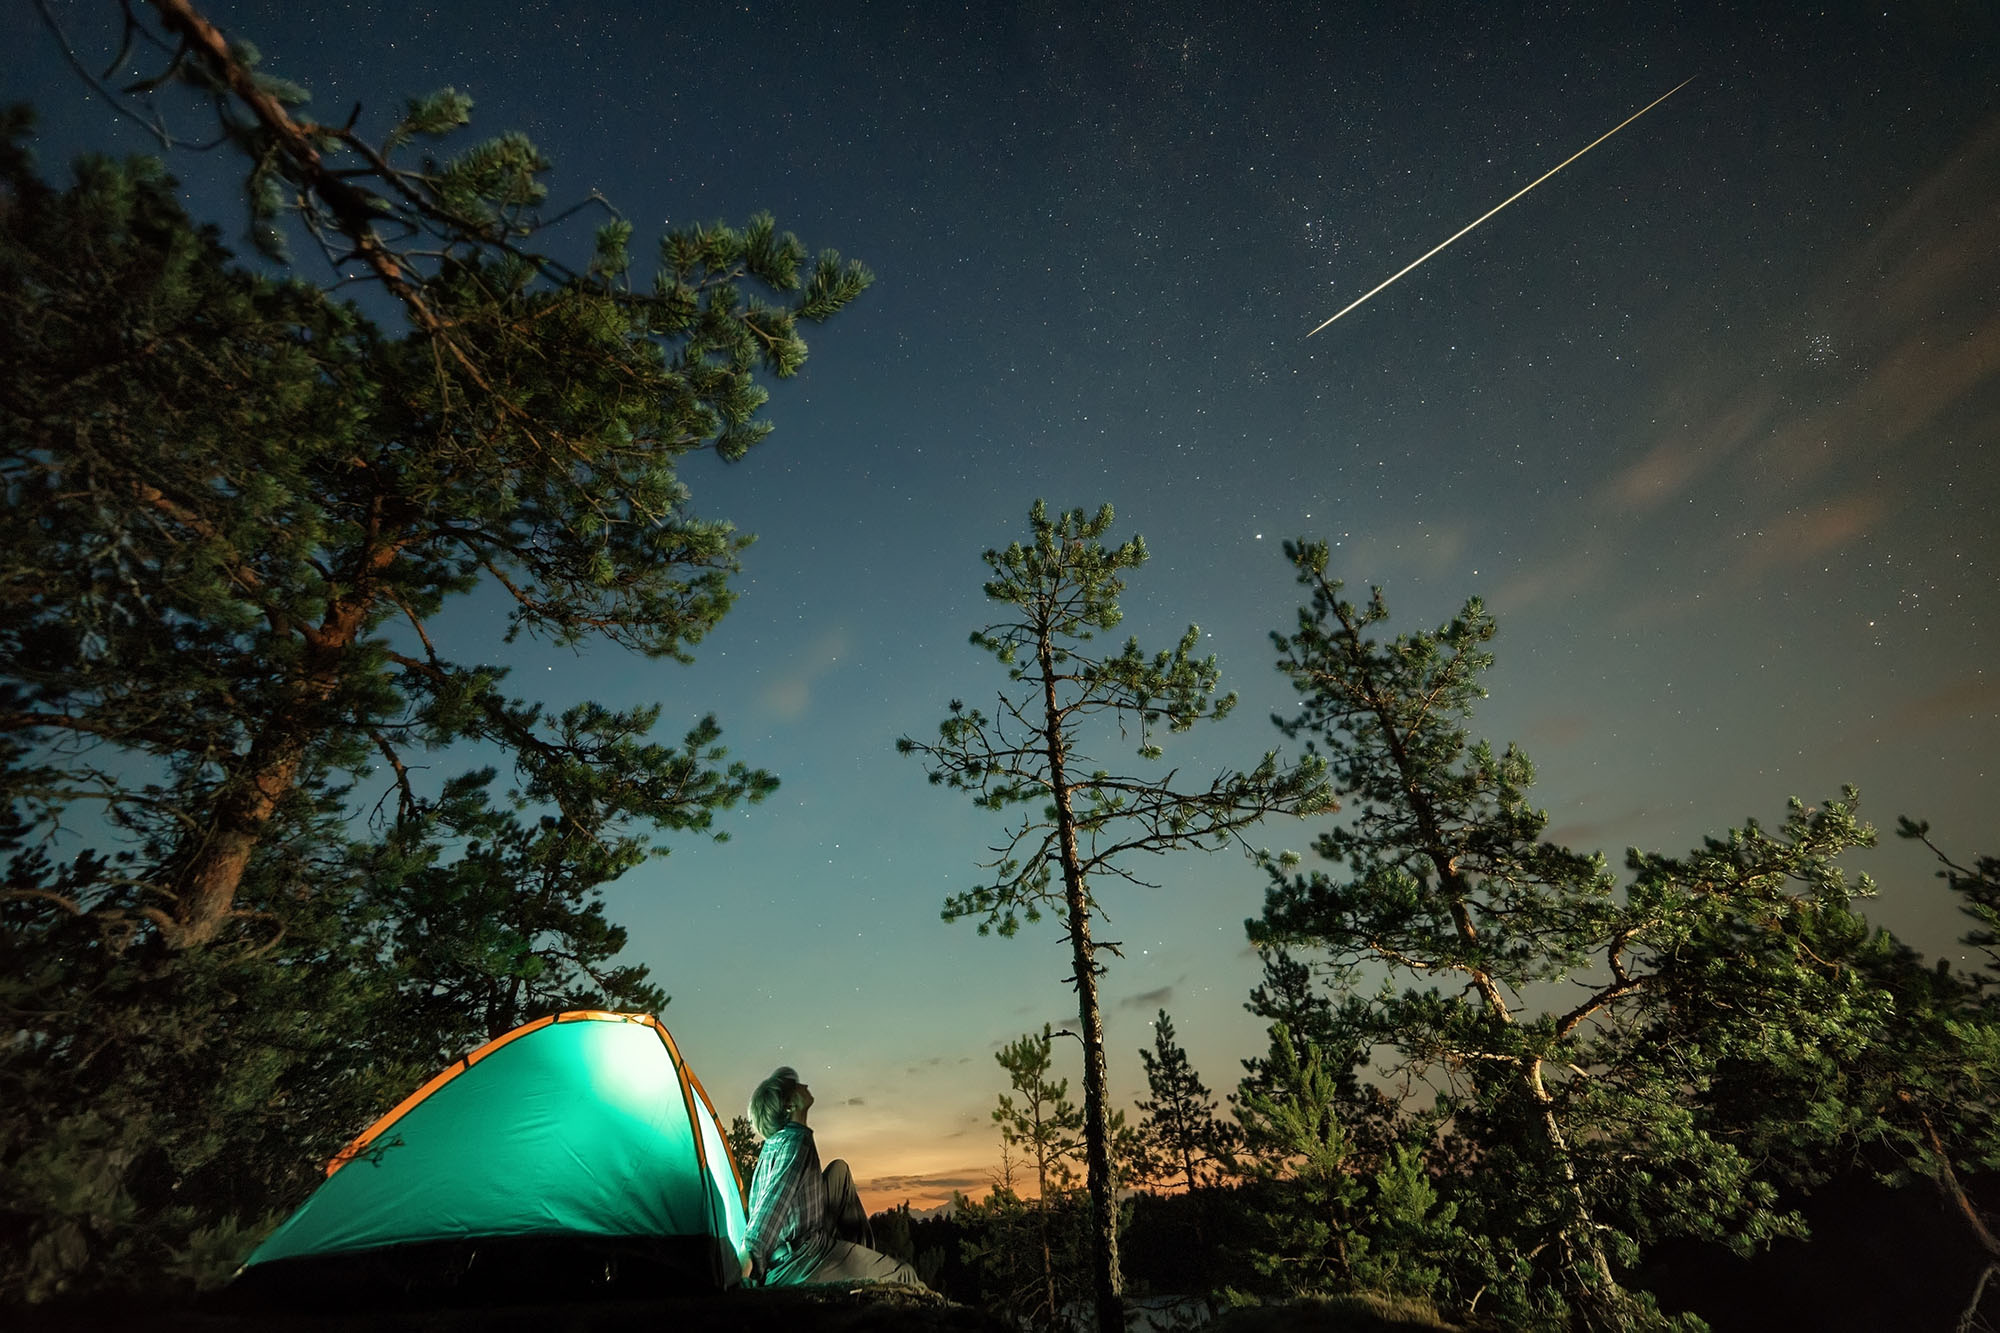 Visit a National Park and Camp Under the Stars